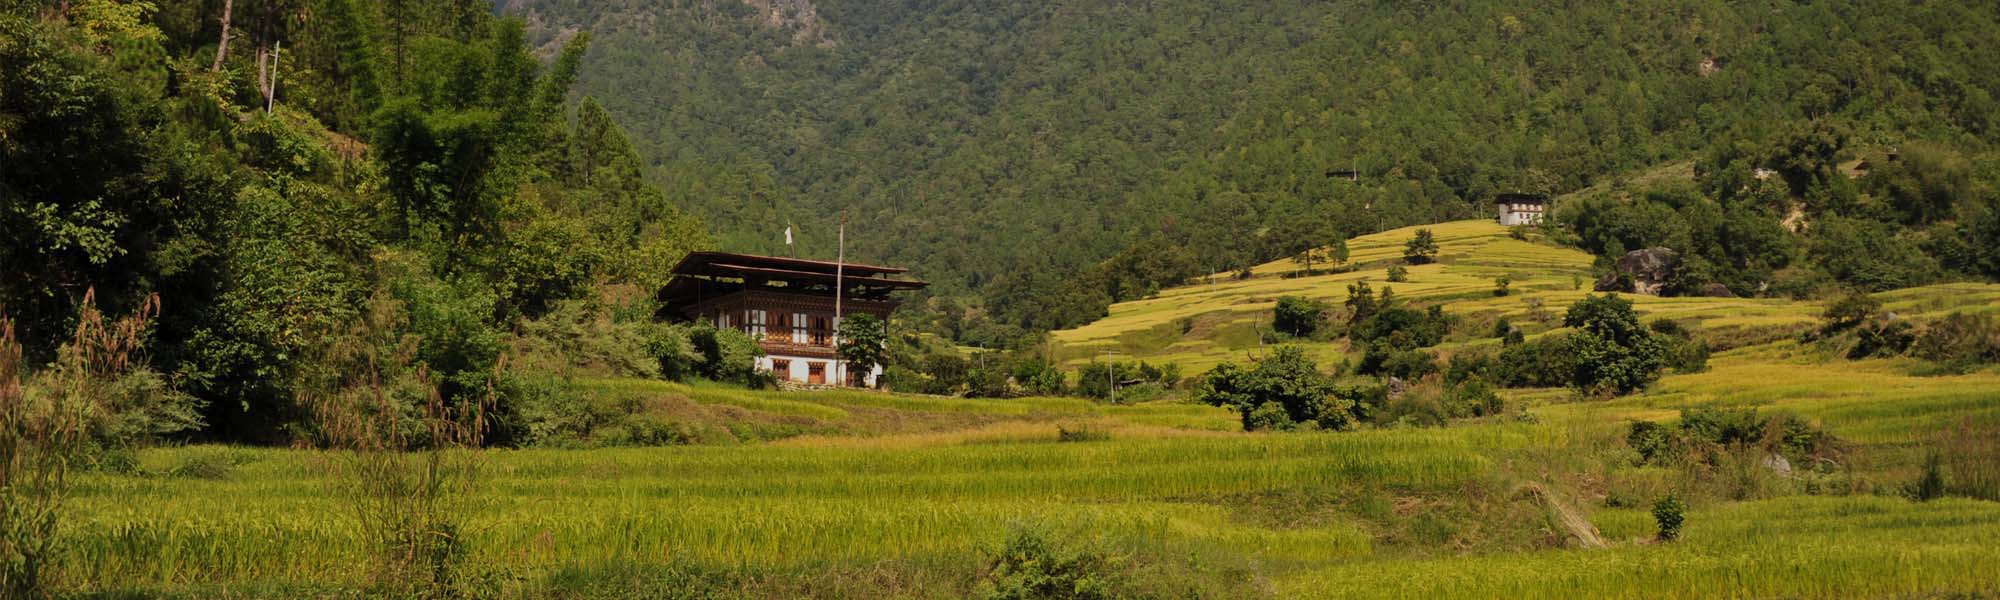 Tell me about the Climatic conditions in Bhutan?